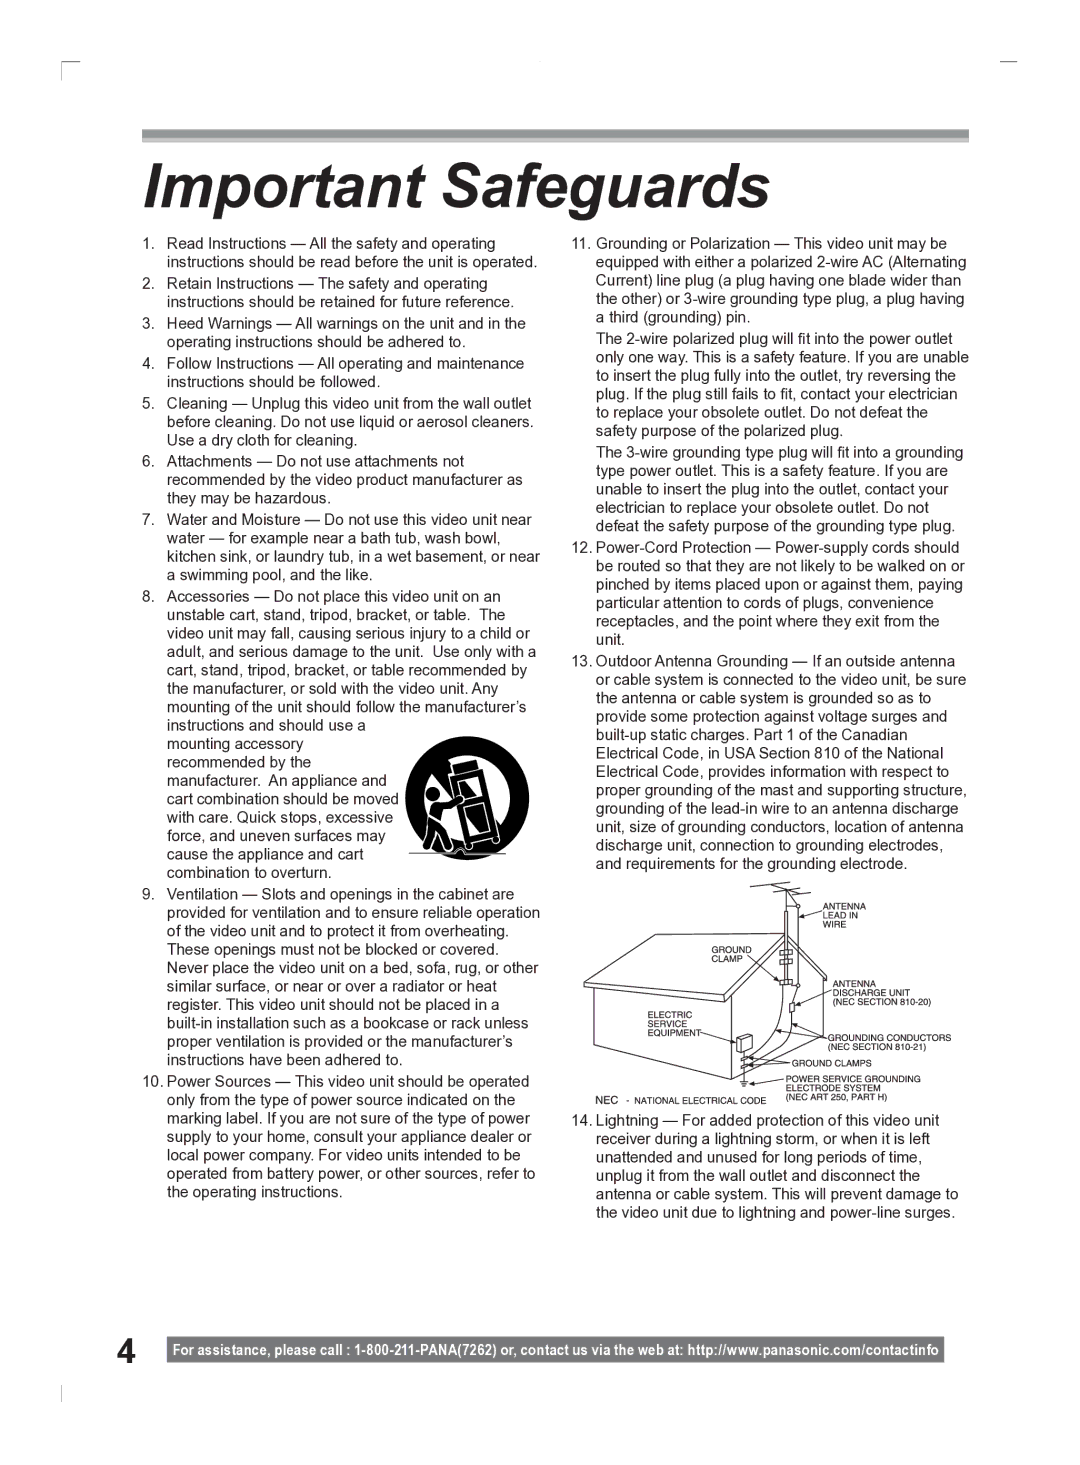 Panasonic PV-GS2 operating instructions Important Safeguards 